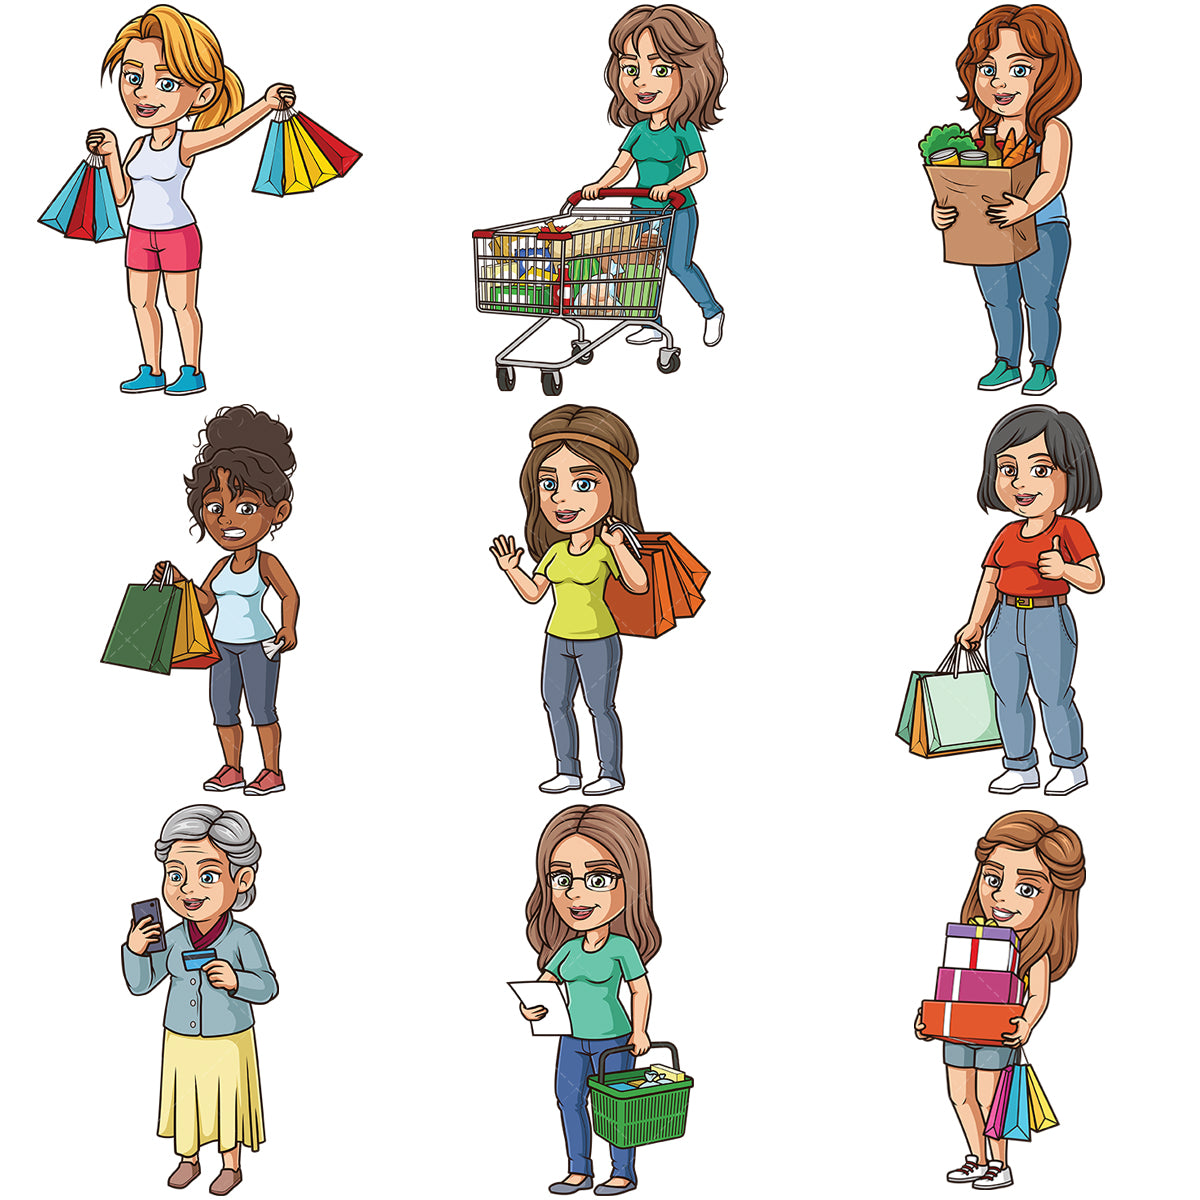 A bundle of 9 royalty-free stock vector illustrations of women shopping.